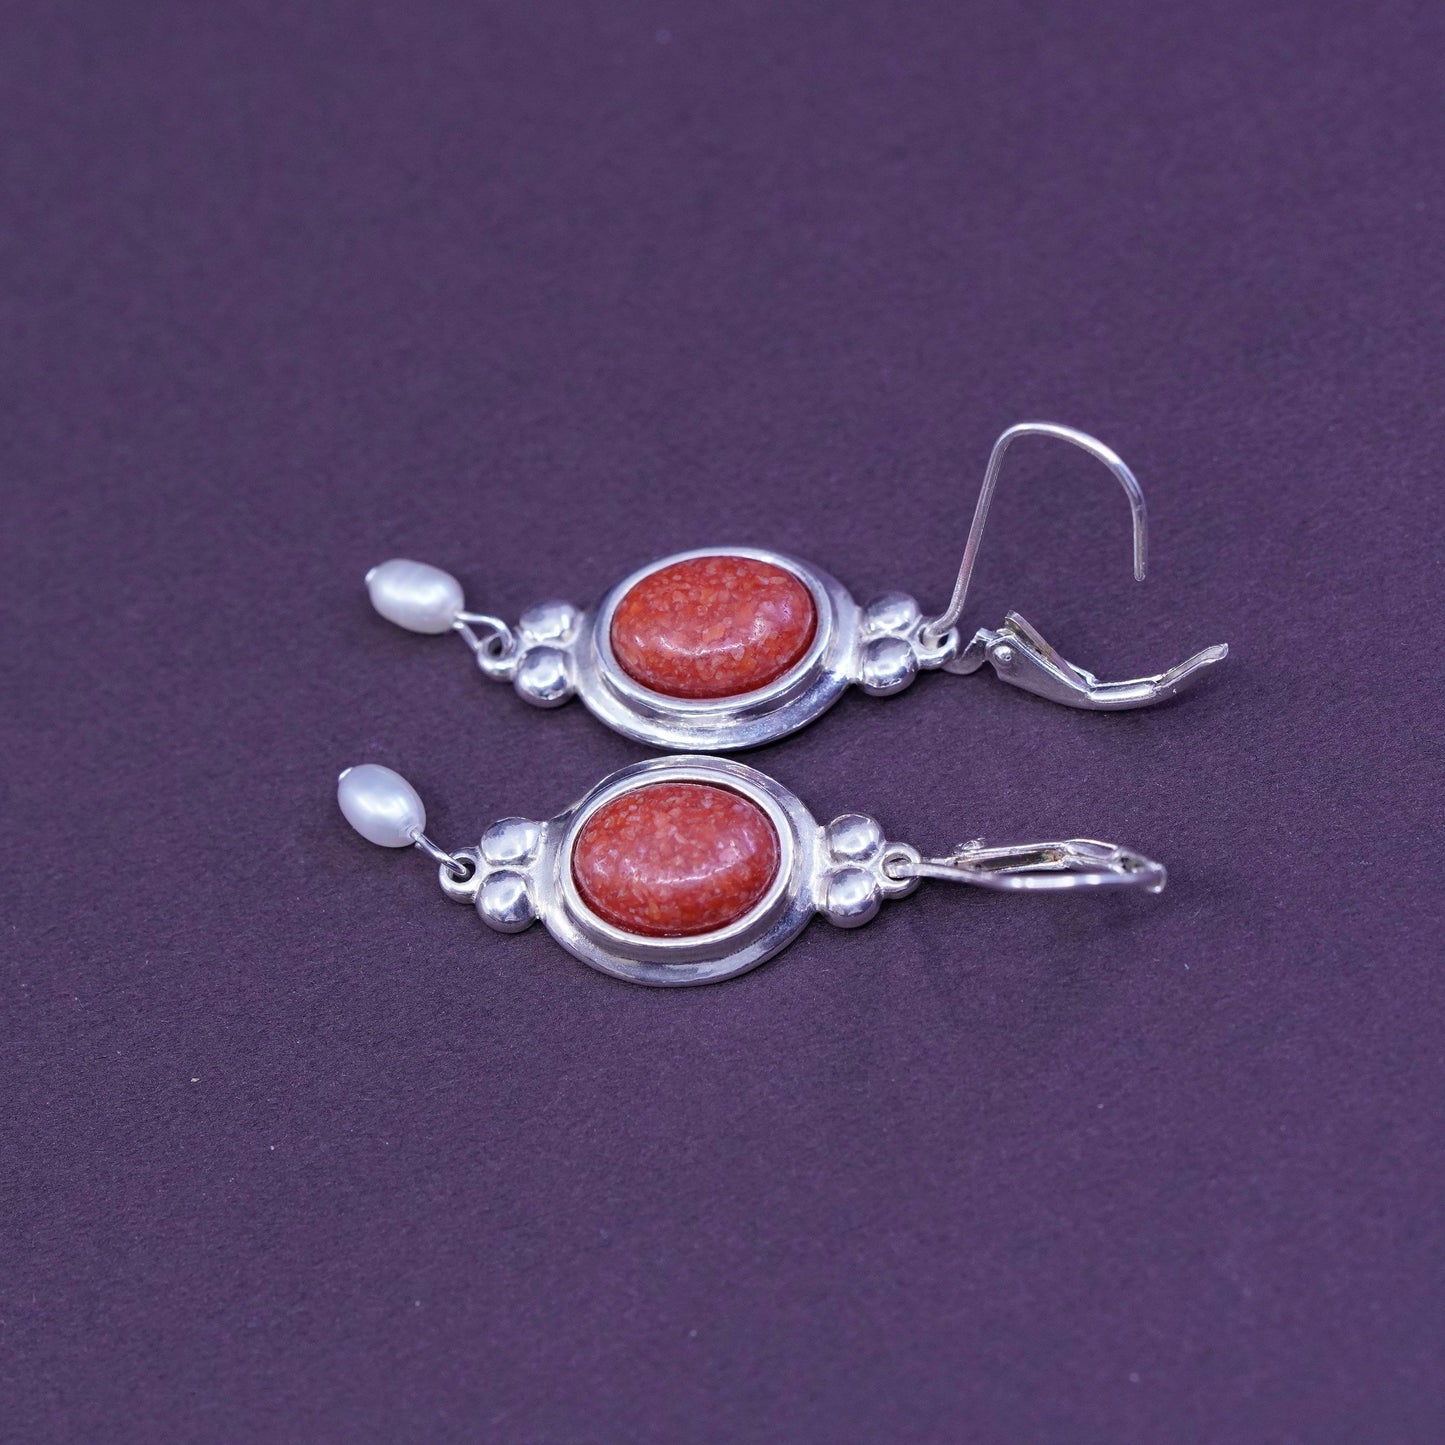 southwestern CCO Sterling 925 silver handmade earrings w/ oval coral and pearl